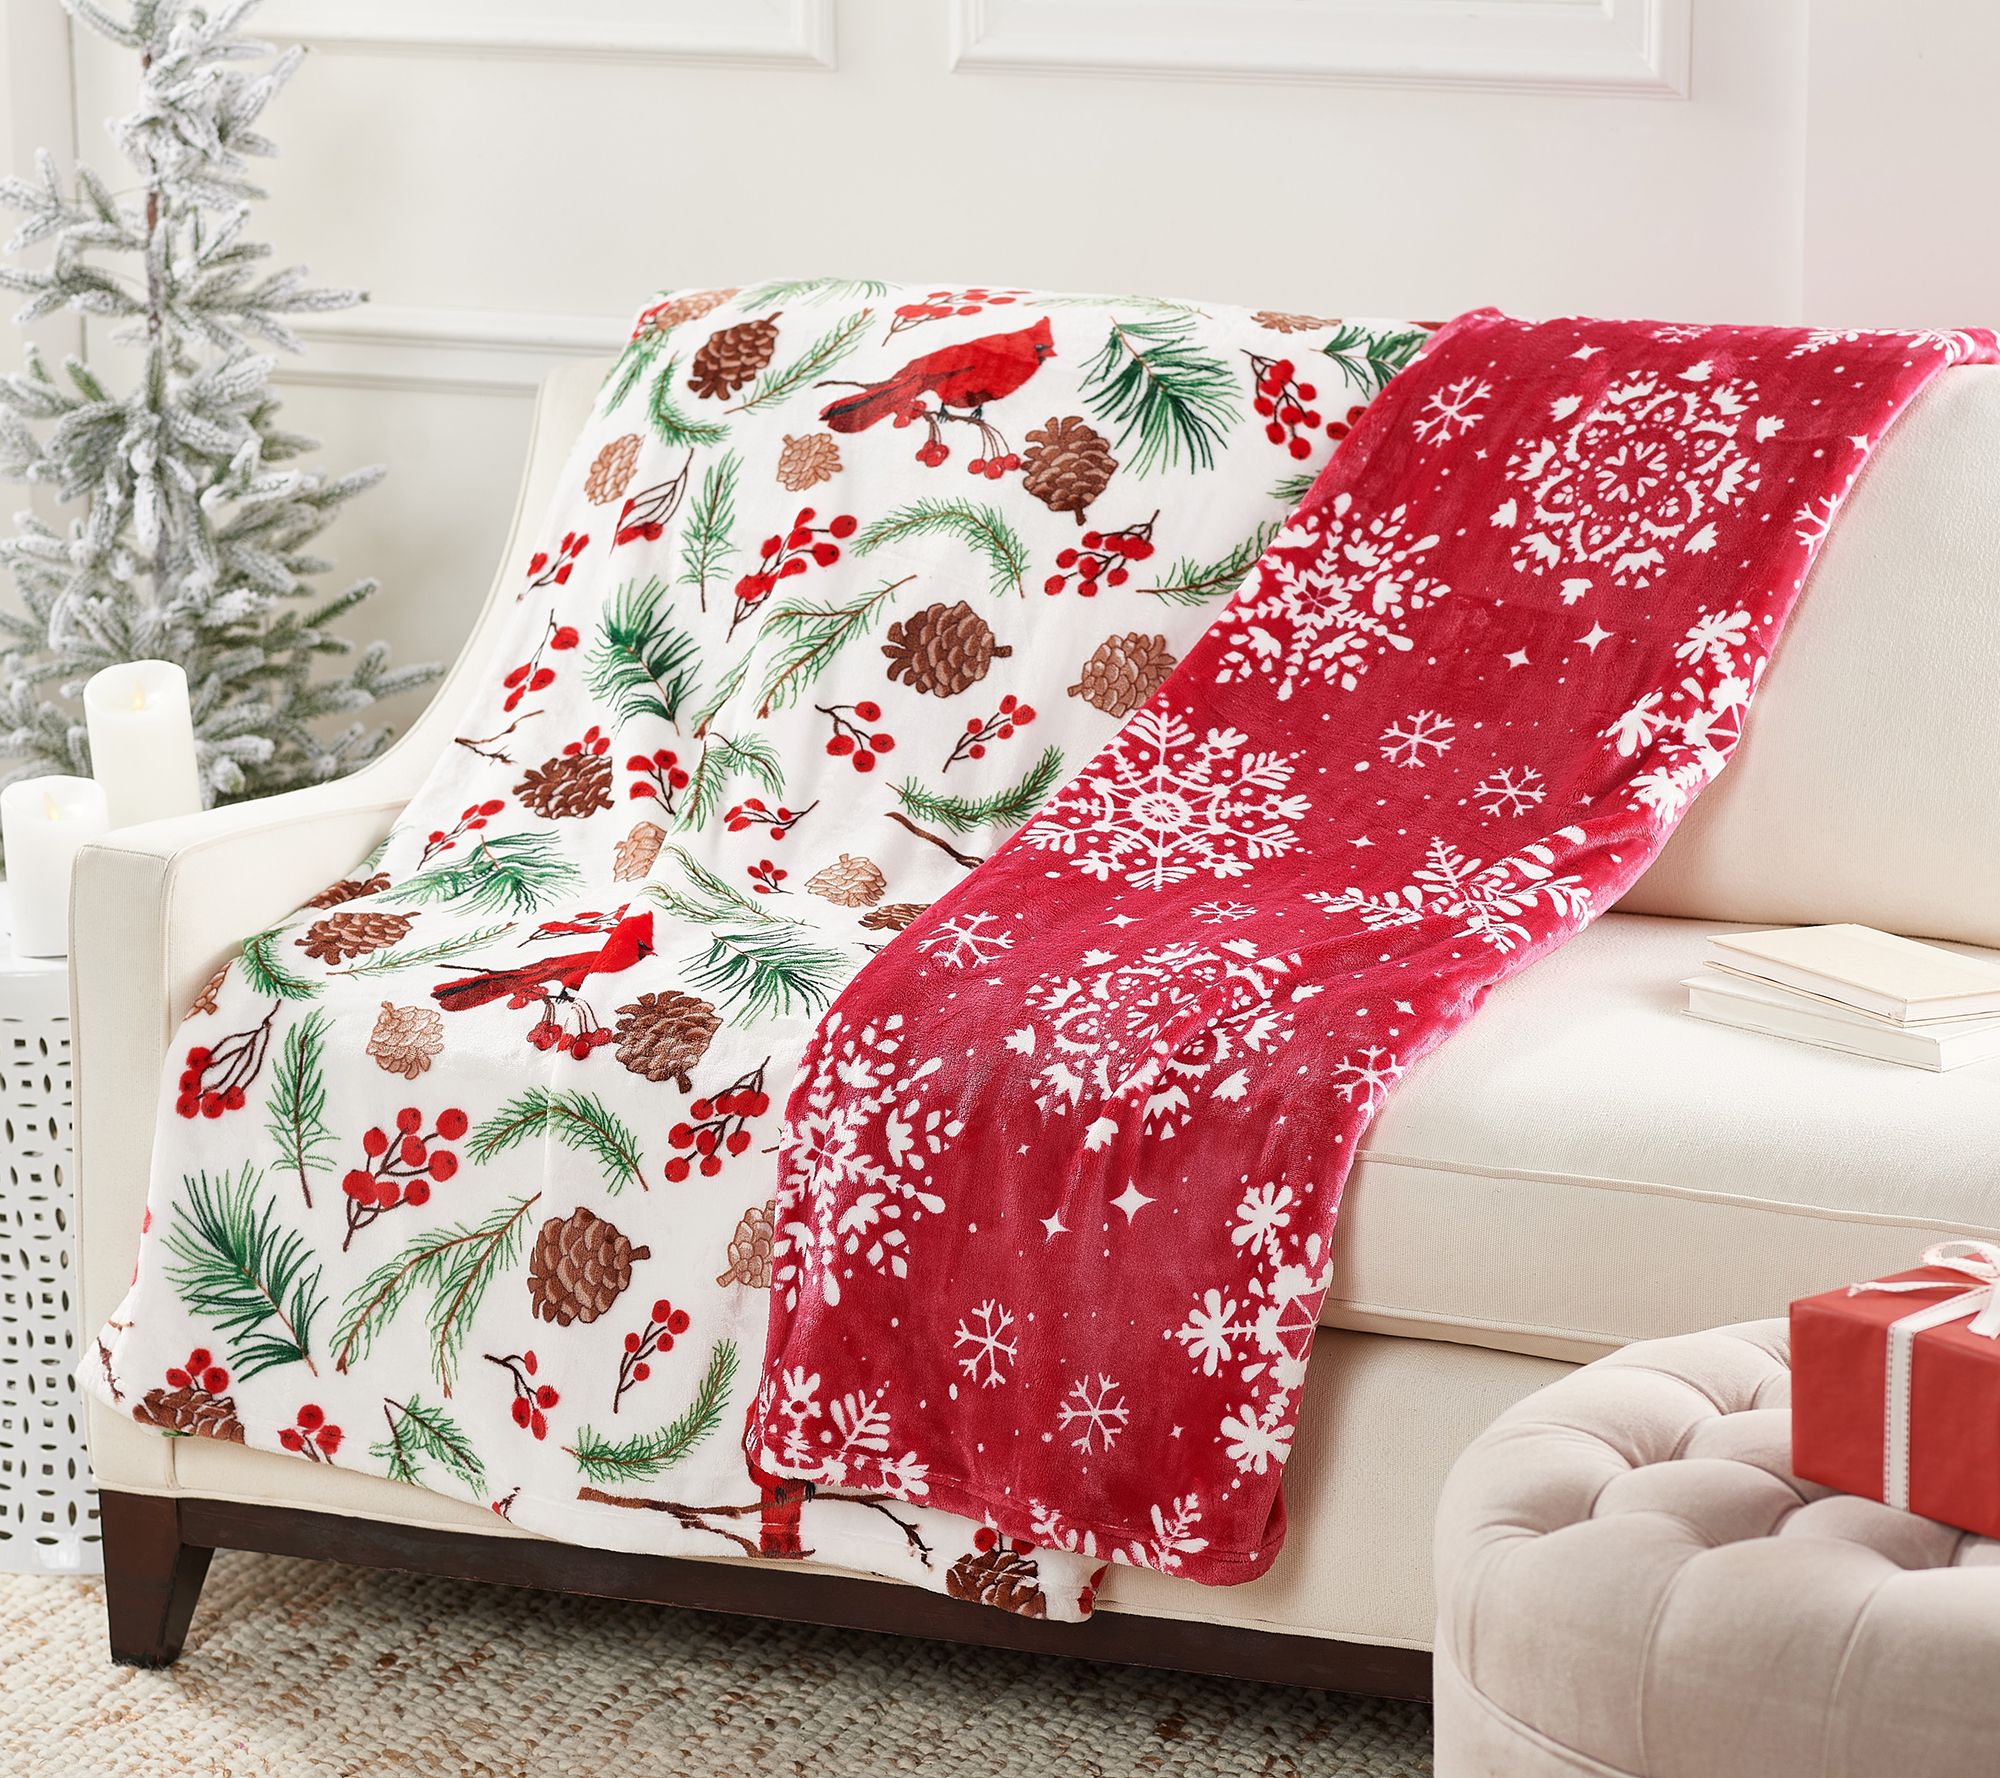 Kringle Express Oversized Set of 2 Printed Holiday Throws - QVC.com